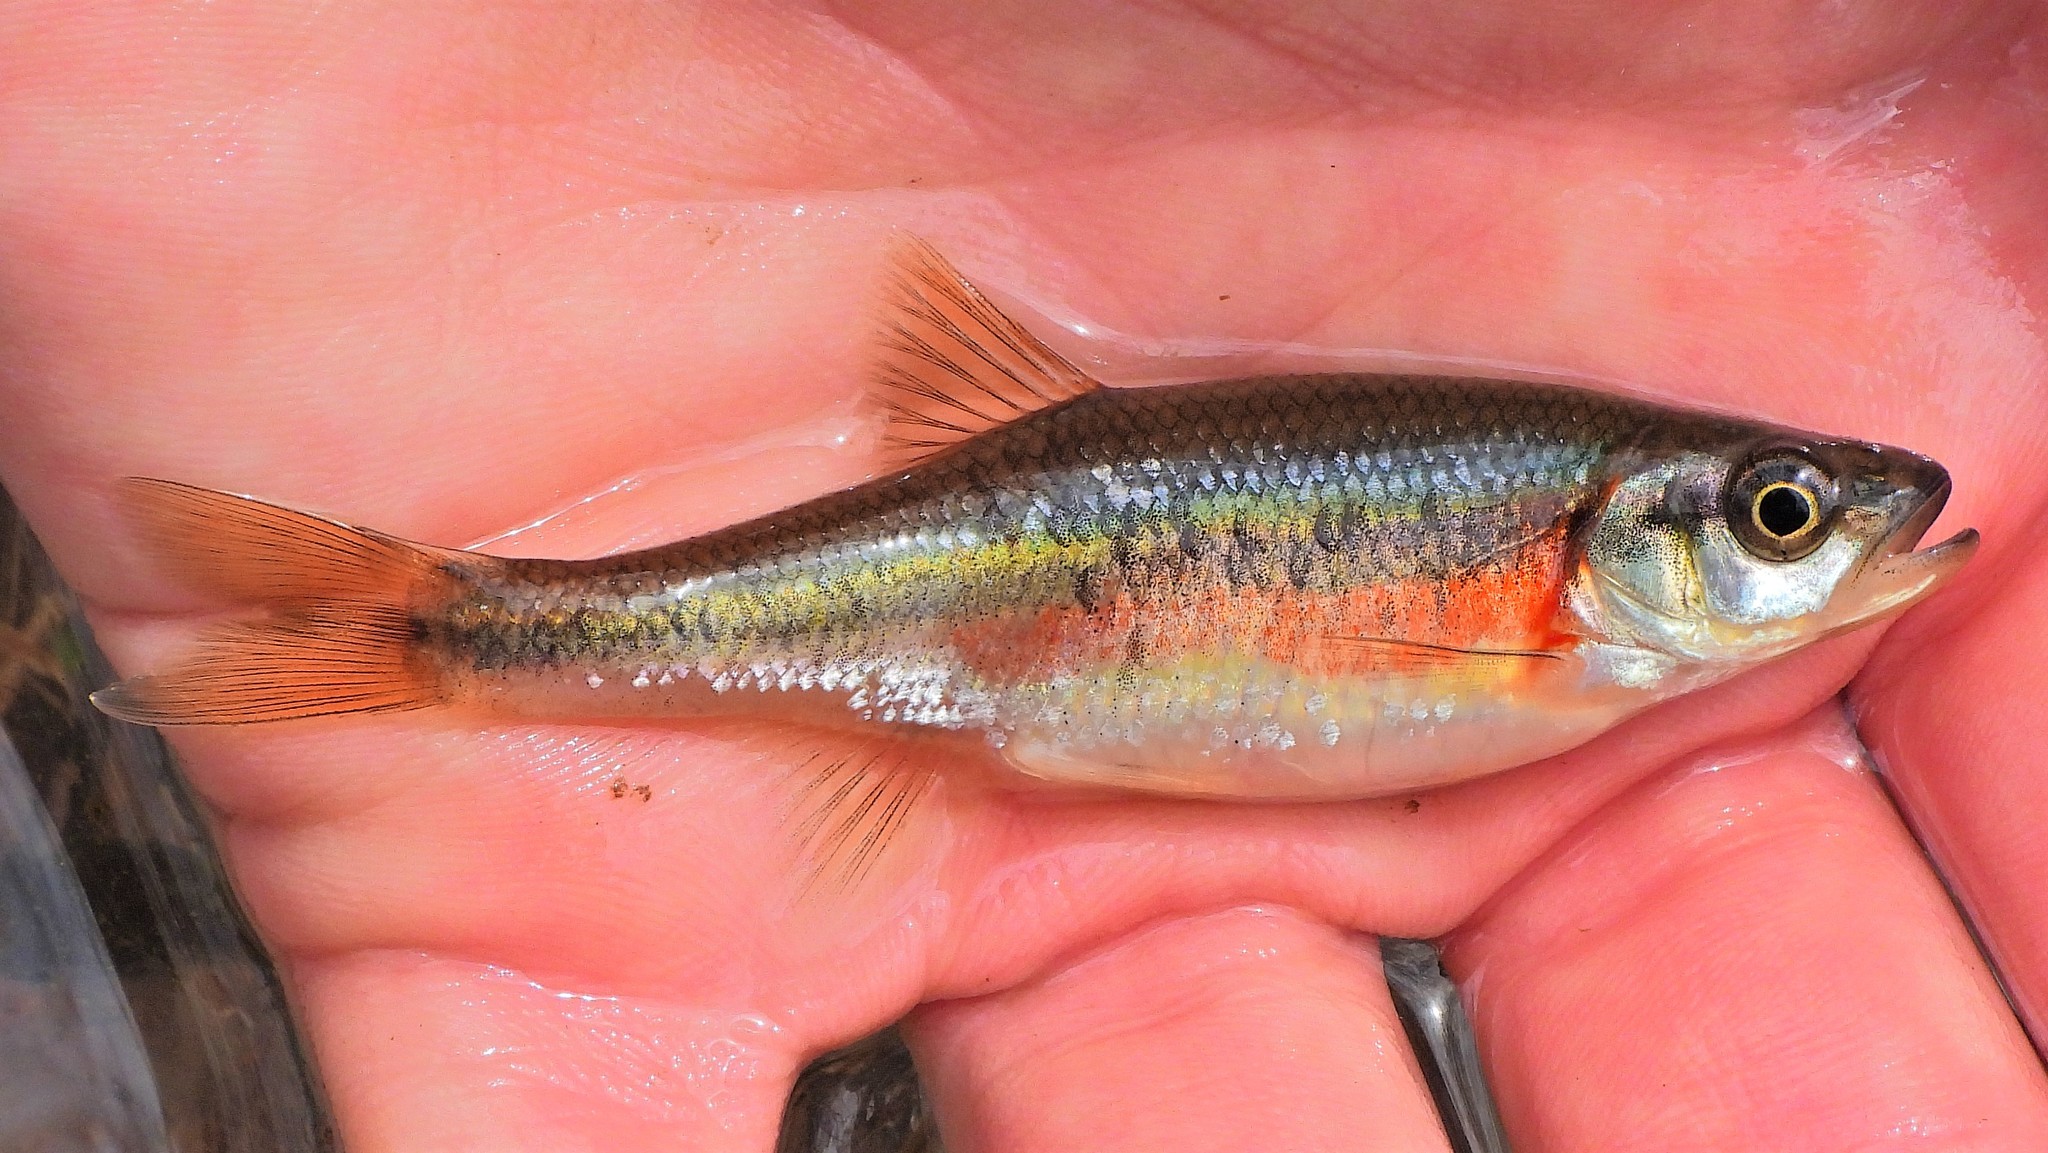 Rosyside Dace